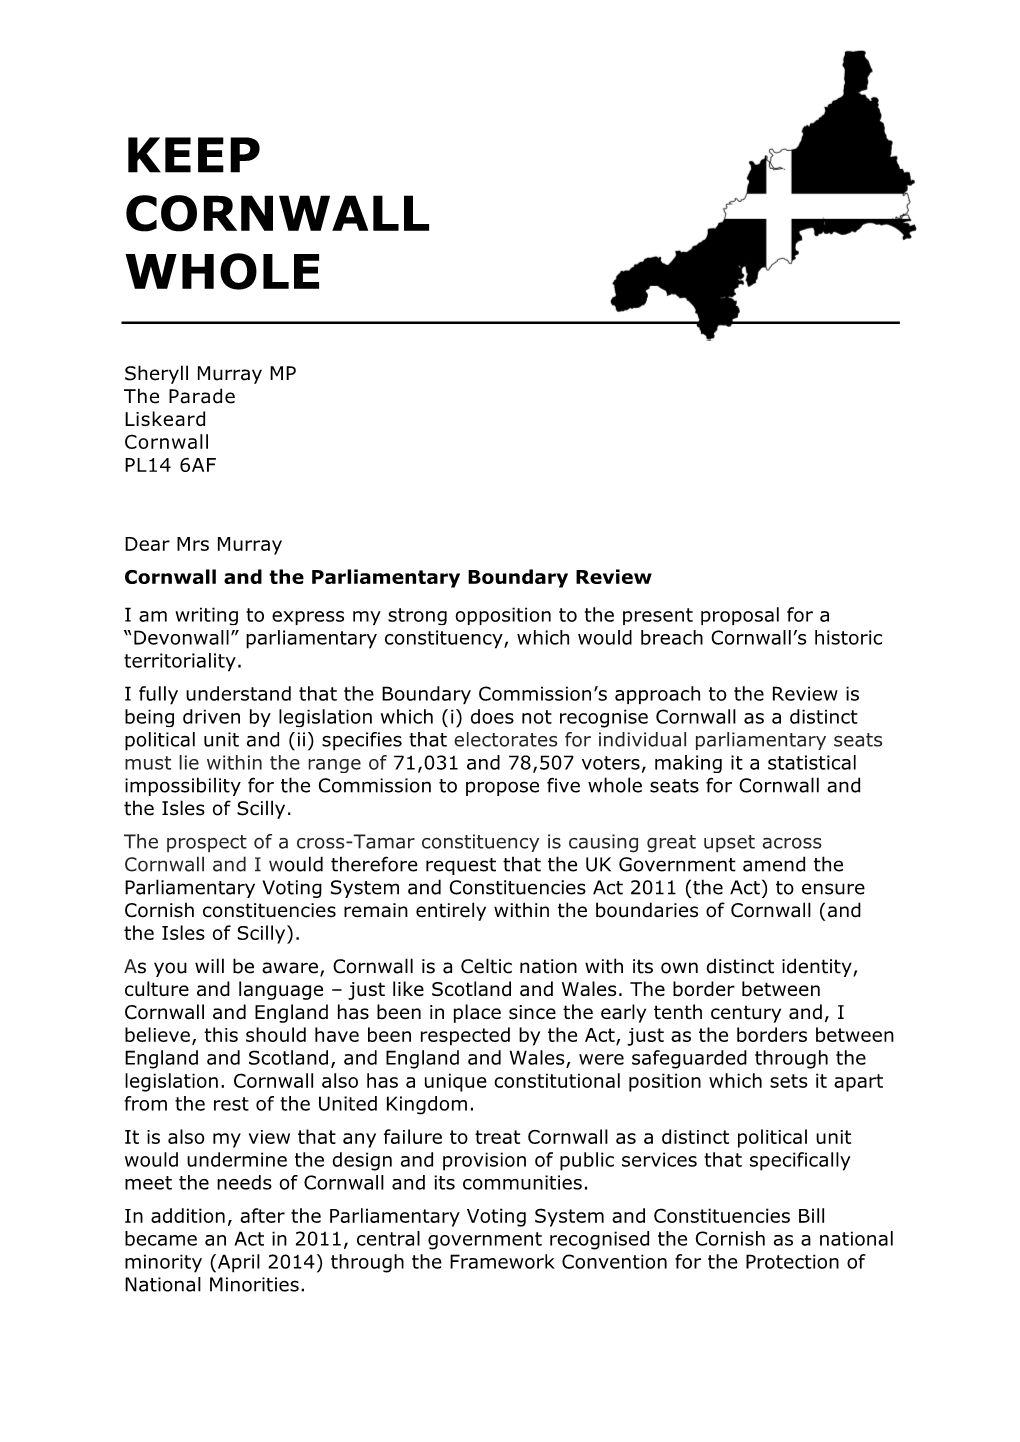 Letter to Sheryll Murray MP (South East Cornwall)